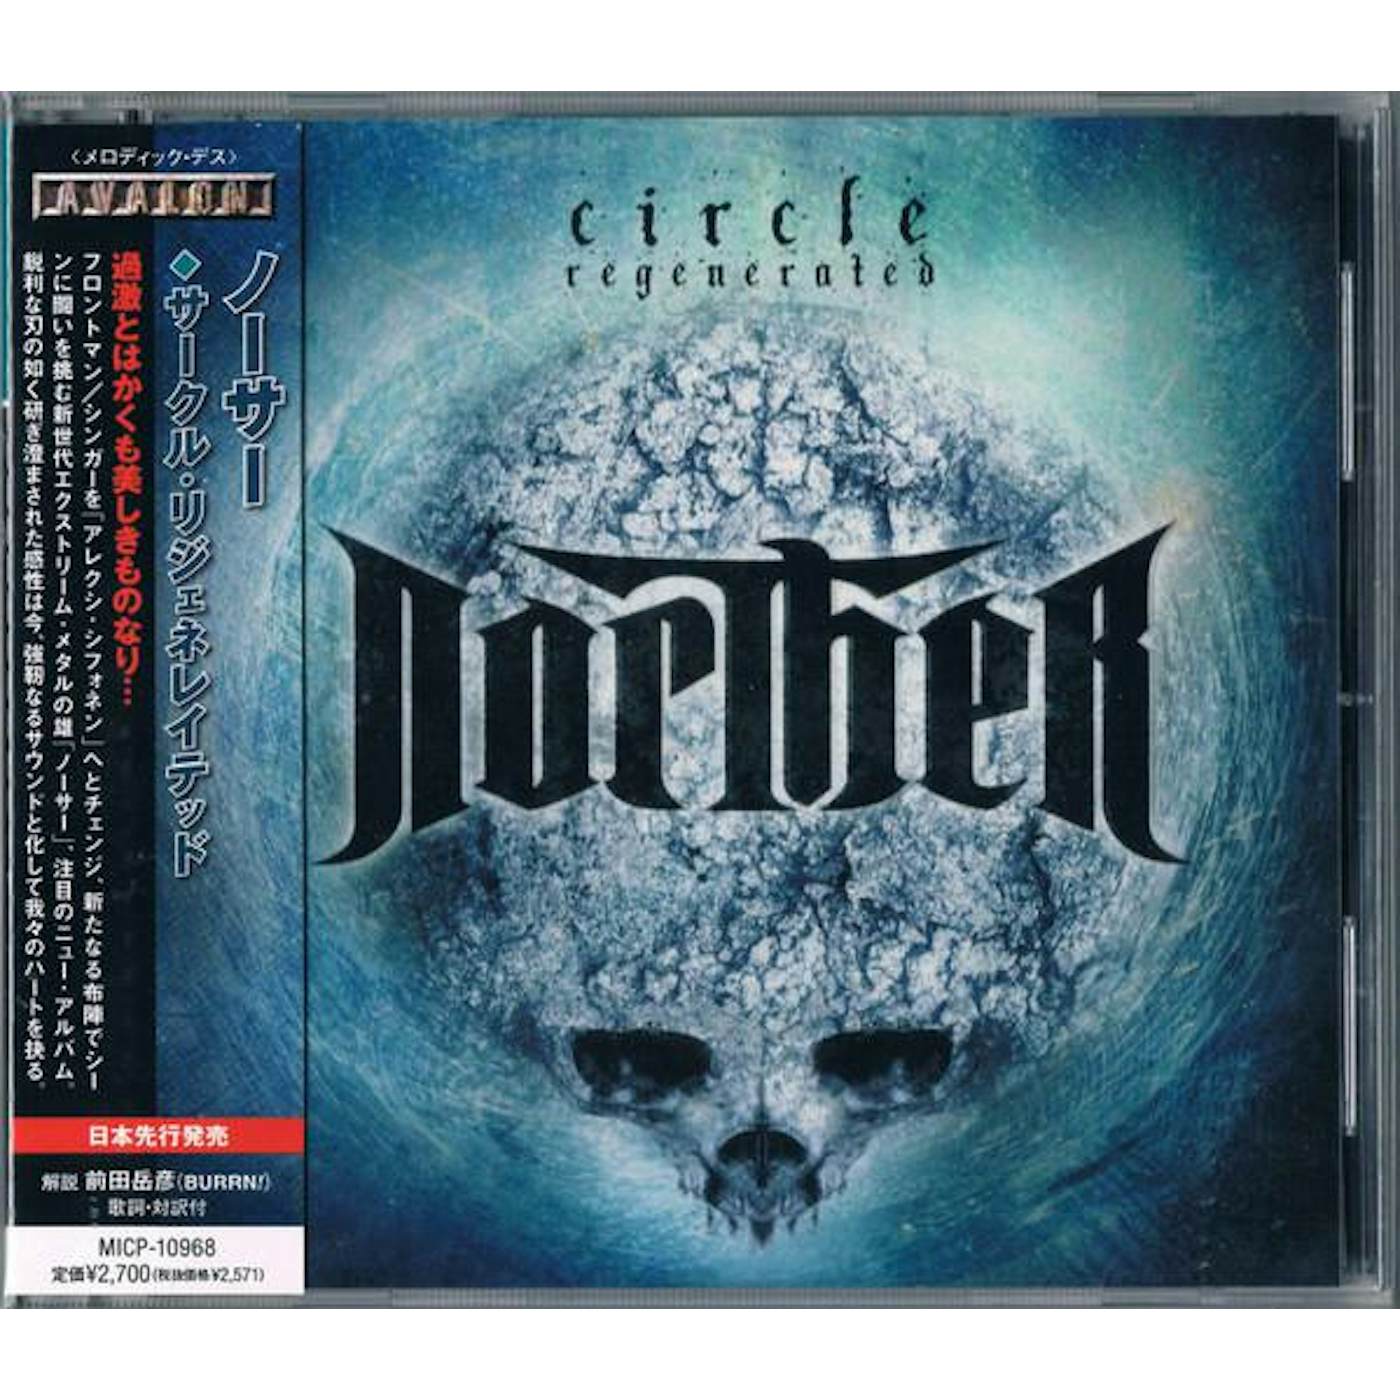 Norther CIRCLE REGENERATED CD